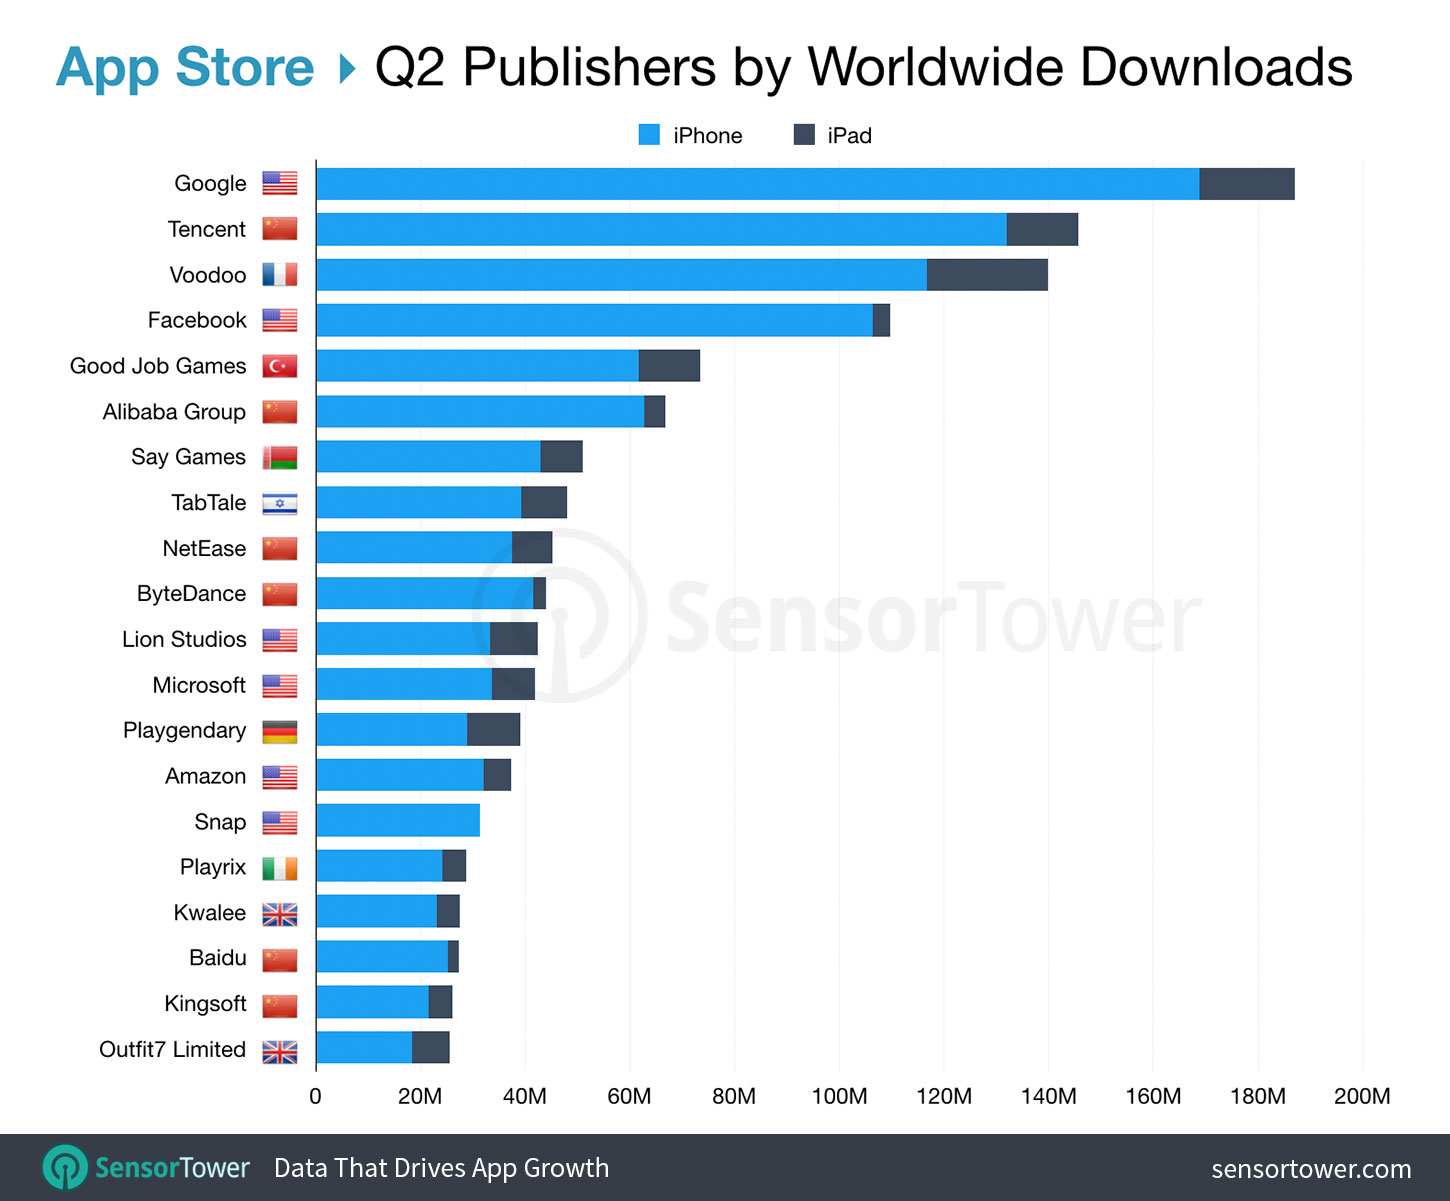 Top App Store Publishers Worldwide for Q2 2019